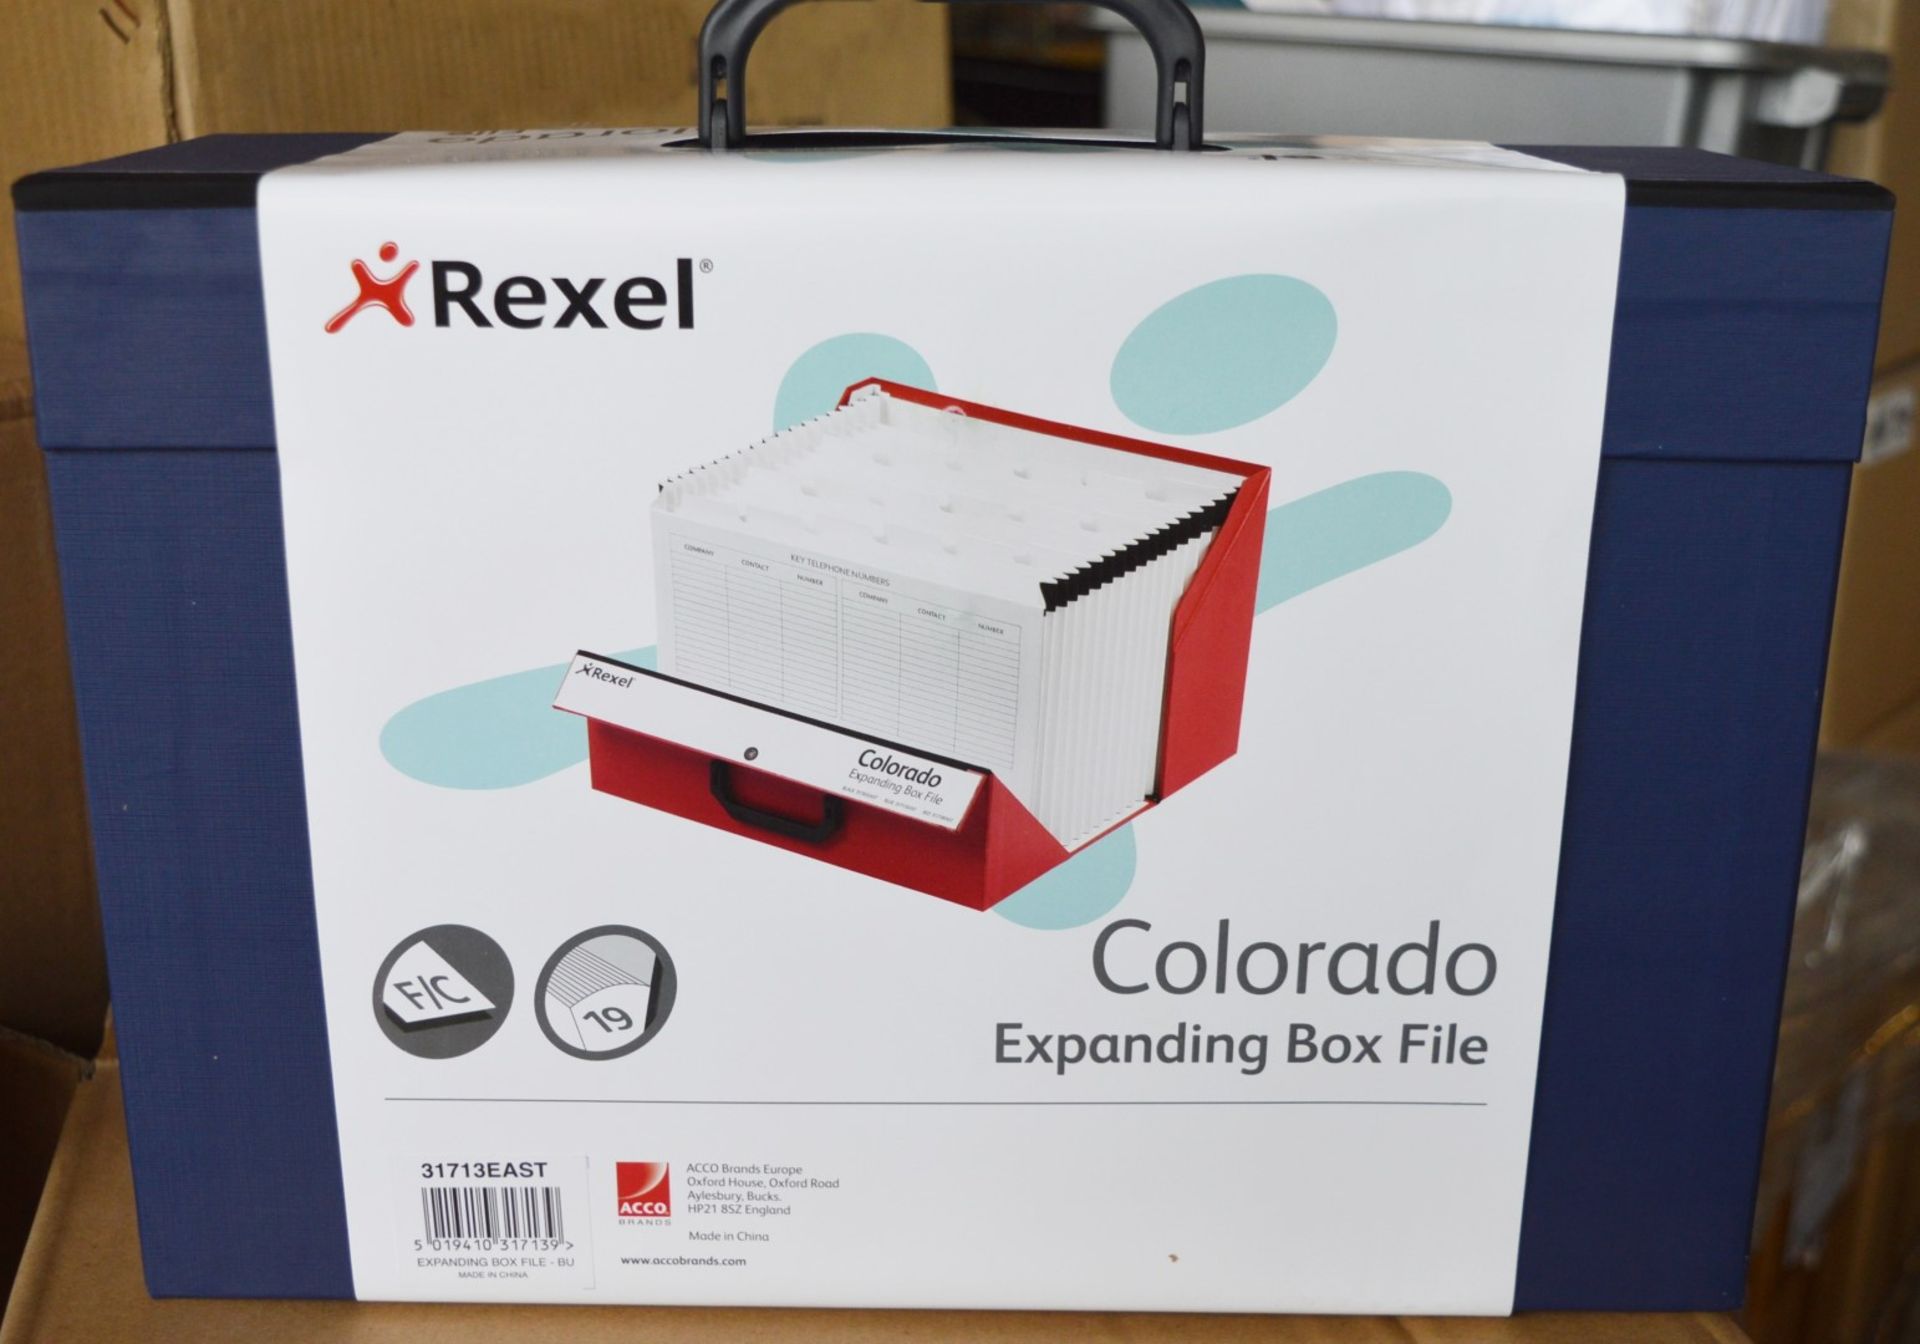 2 x Rexel Colorado Expanding Document Box Files - Blue Colour - Product Code 31713EAST - Brand New